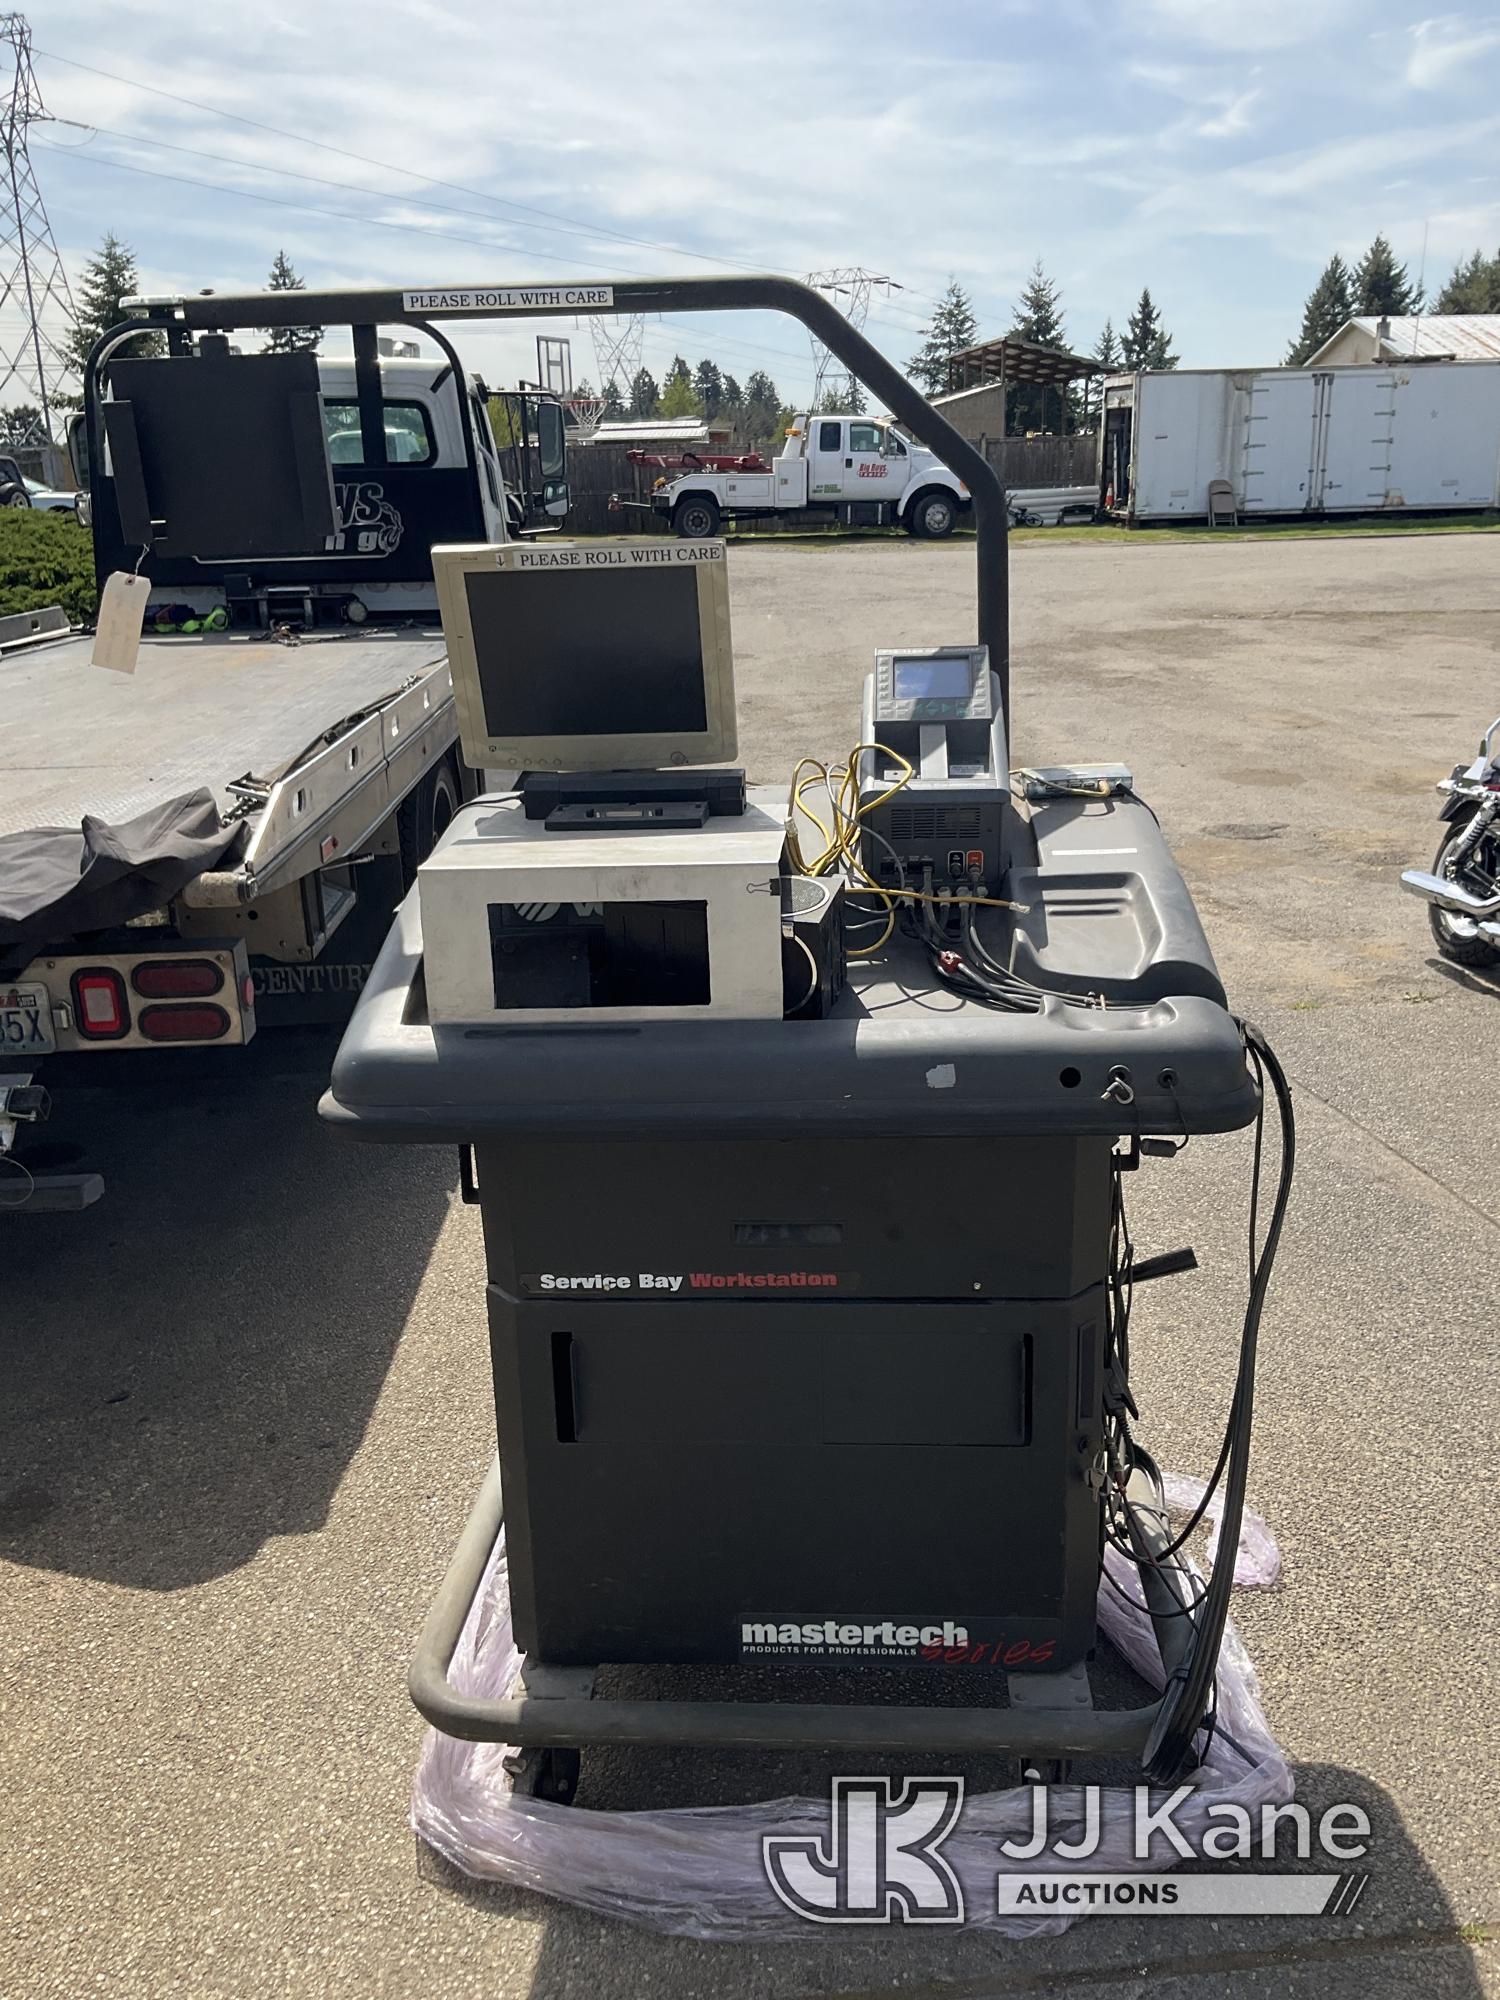 (Tacoma, WA) Master Tech Pax-110 Gas Analyzer NOTE: This unit is being sold AS IS/WHERE IS via Timed